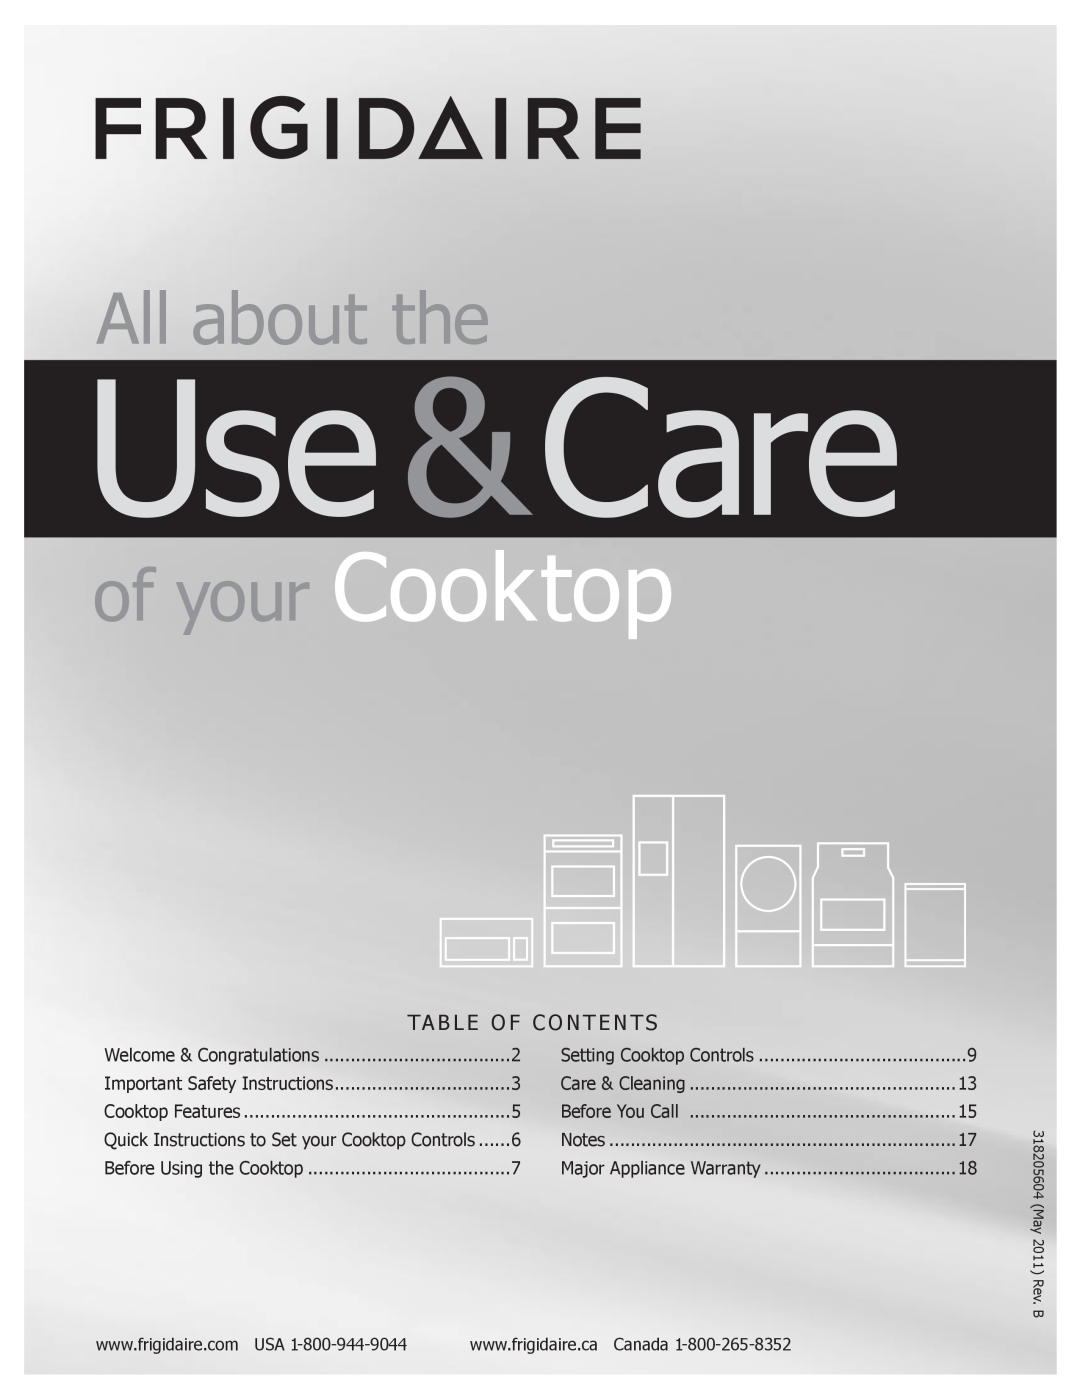 Frigidaire FGIC3067MB, FGIC3667MB important safety instructions Use &Care, All about the, of your Cooktop, May 2011 Rev. B 